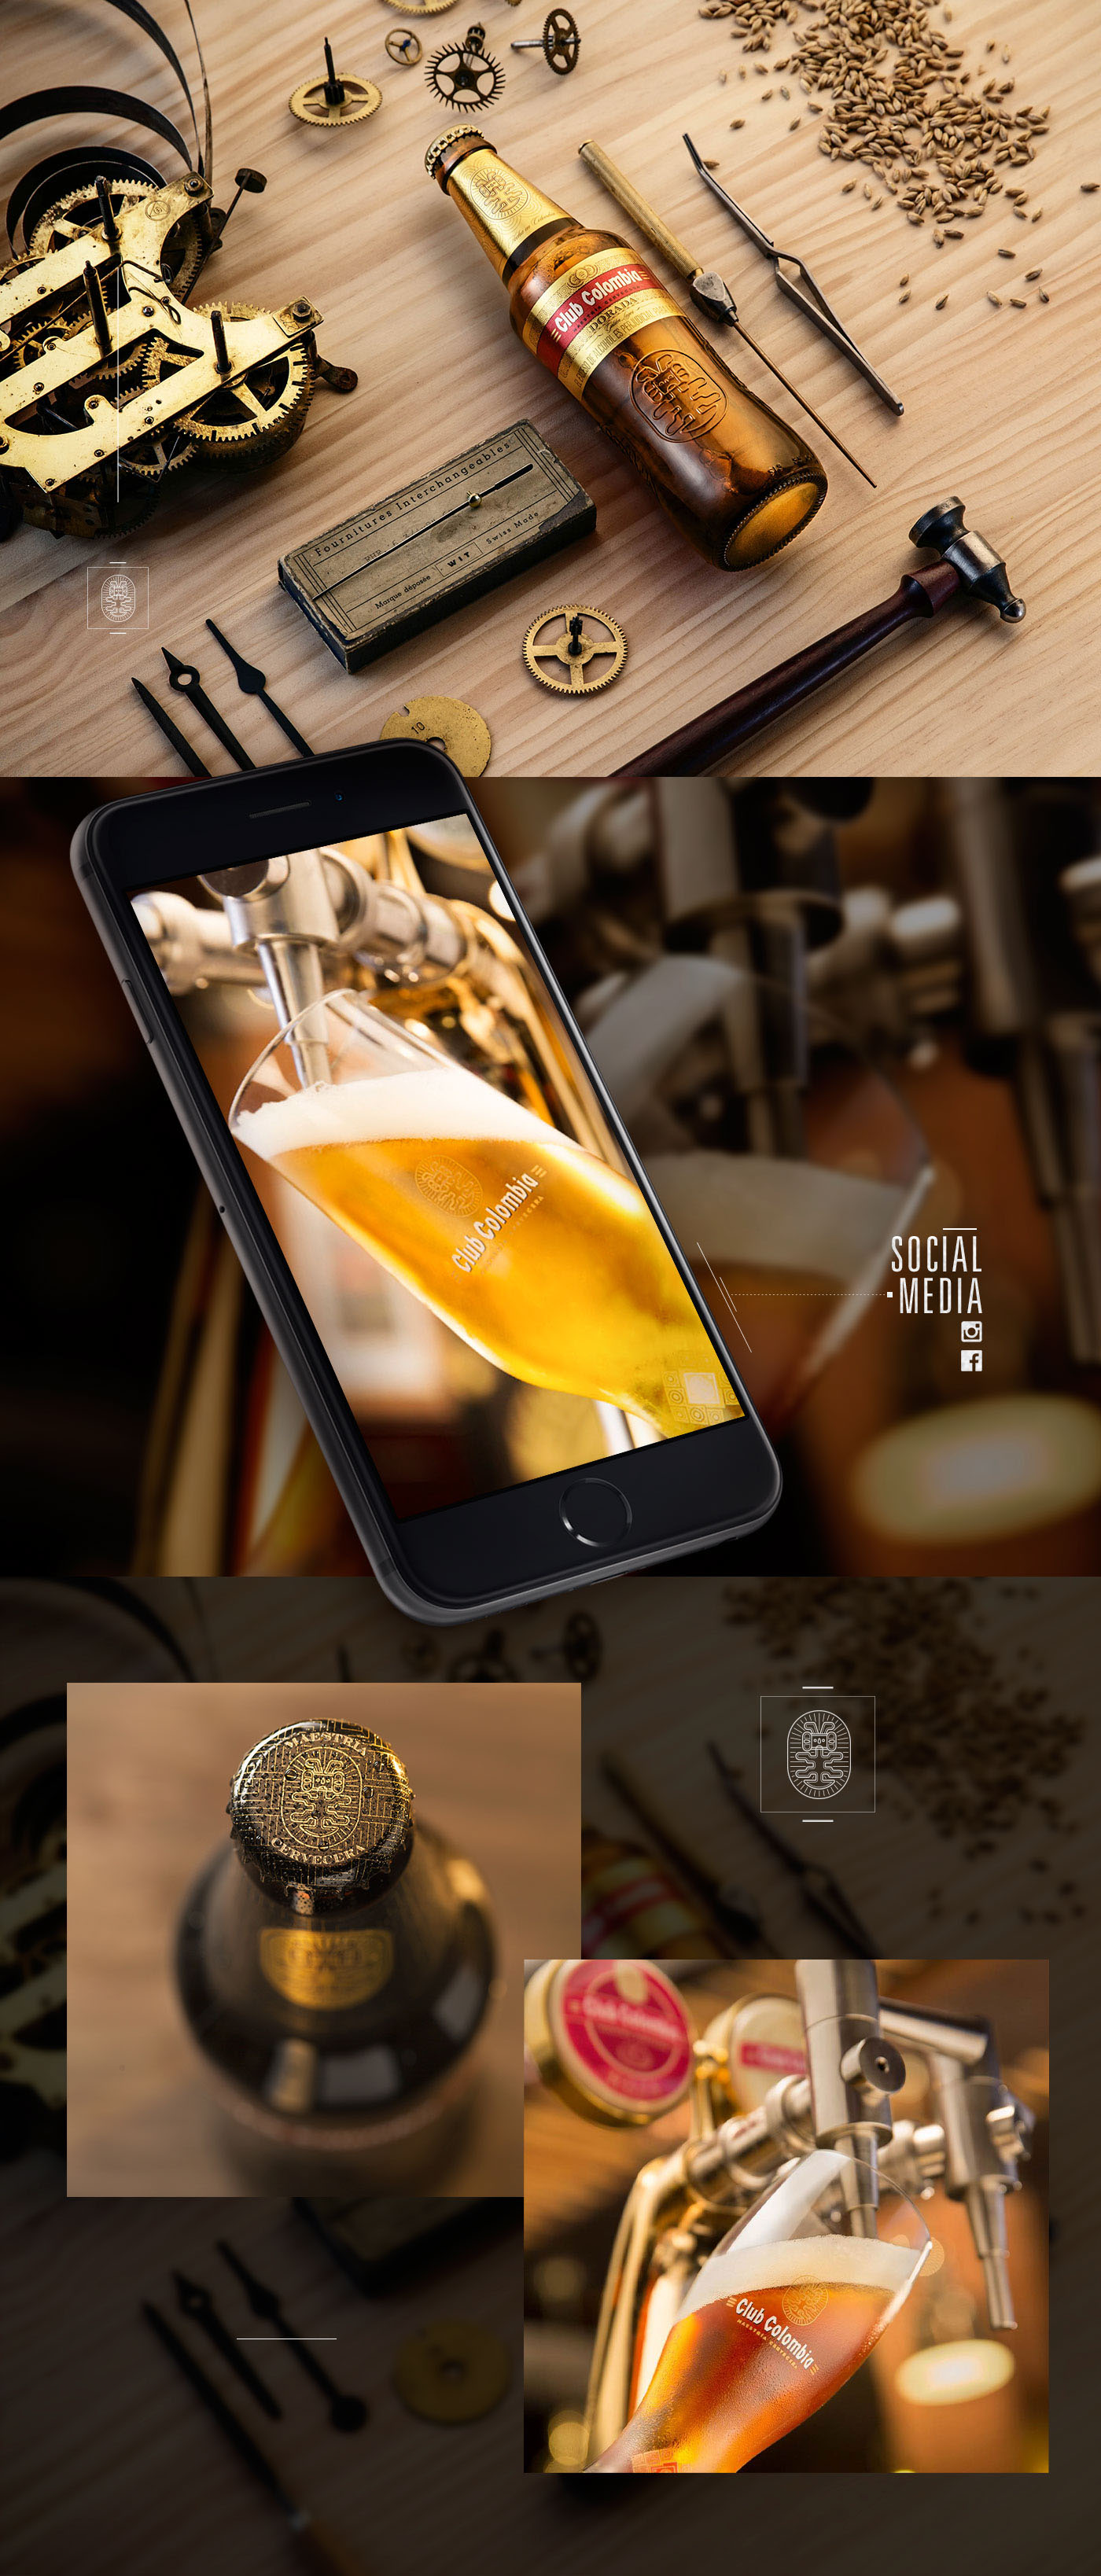 #ClubColombia club colombia beauty content beer design ArtDirection